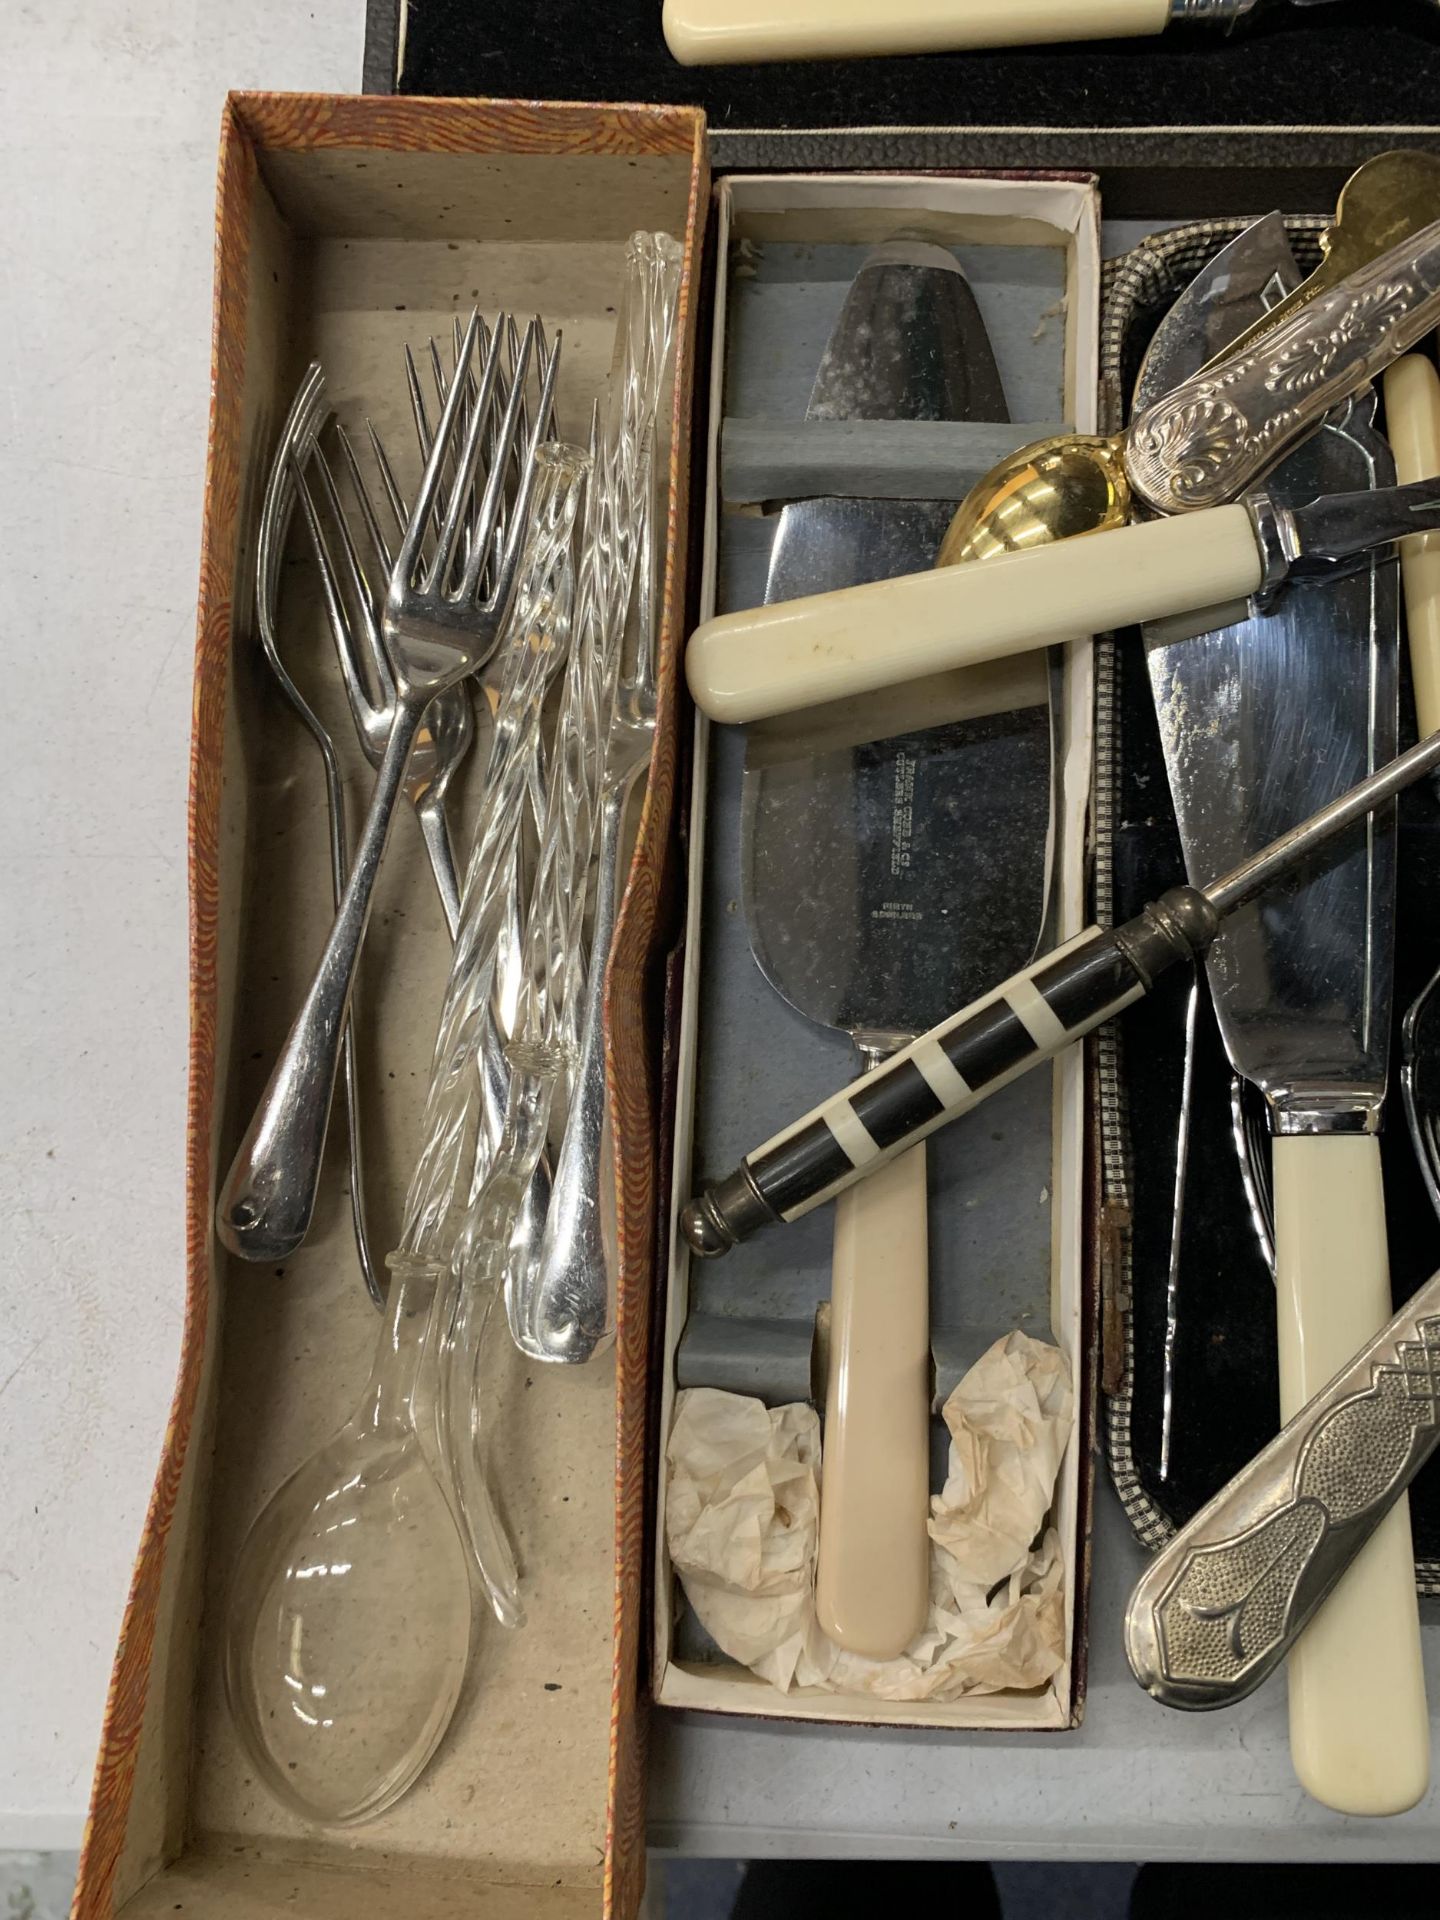 A QUANTITY OF VINTAGE FLATWARE, SOME BOXED, TO INCLUDE SERVING SETS PLUS A TABLE LIGHTER, ETC - Image 4 of 5